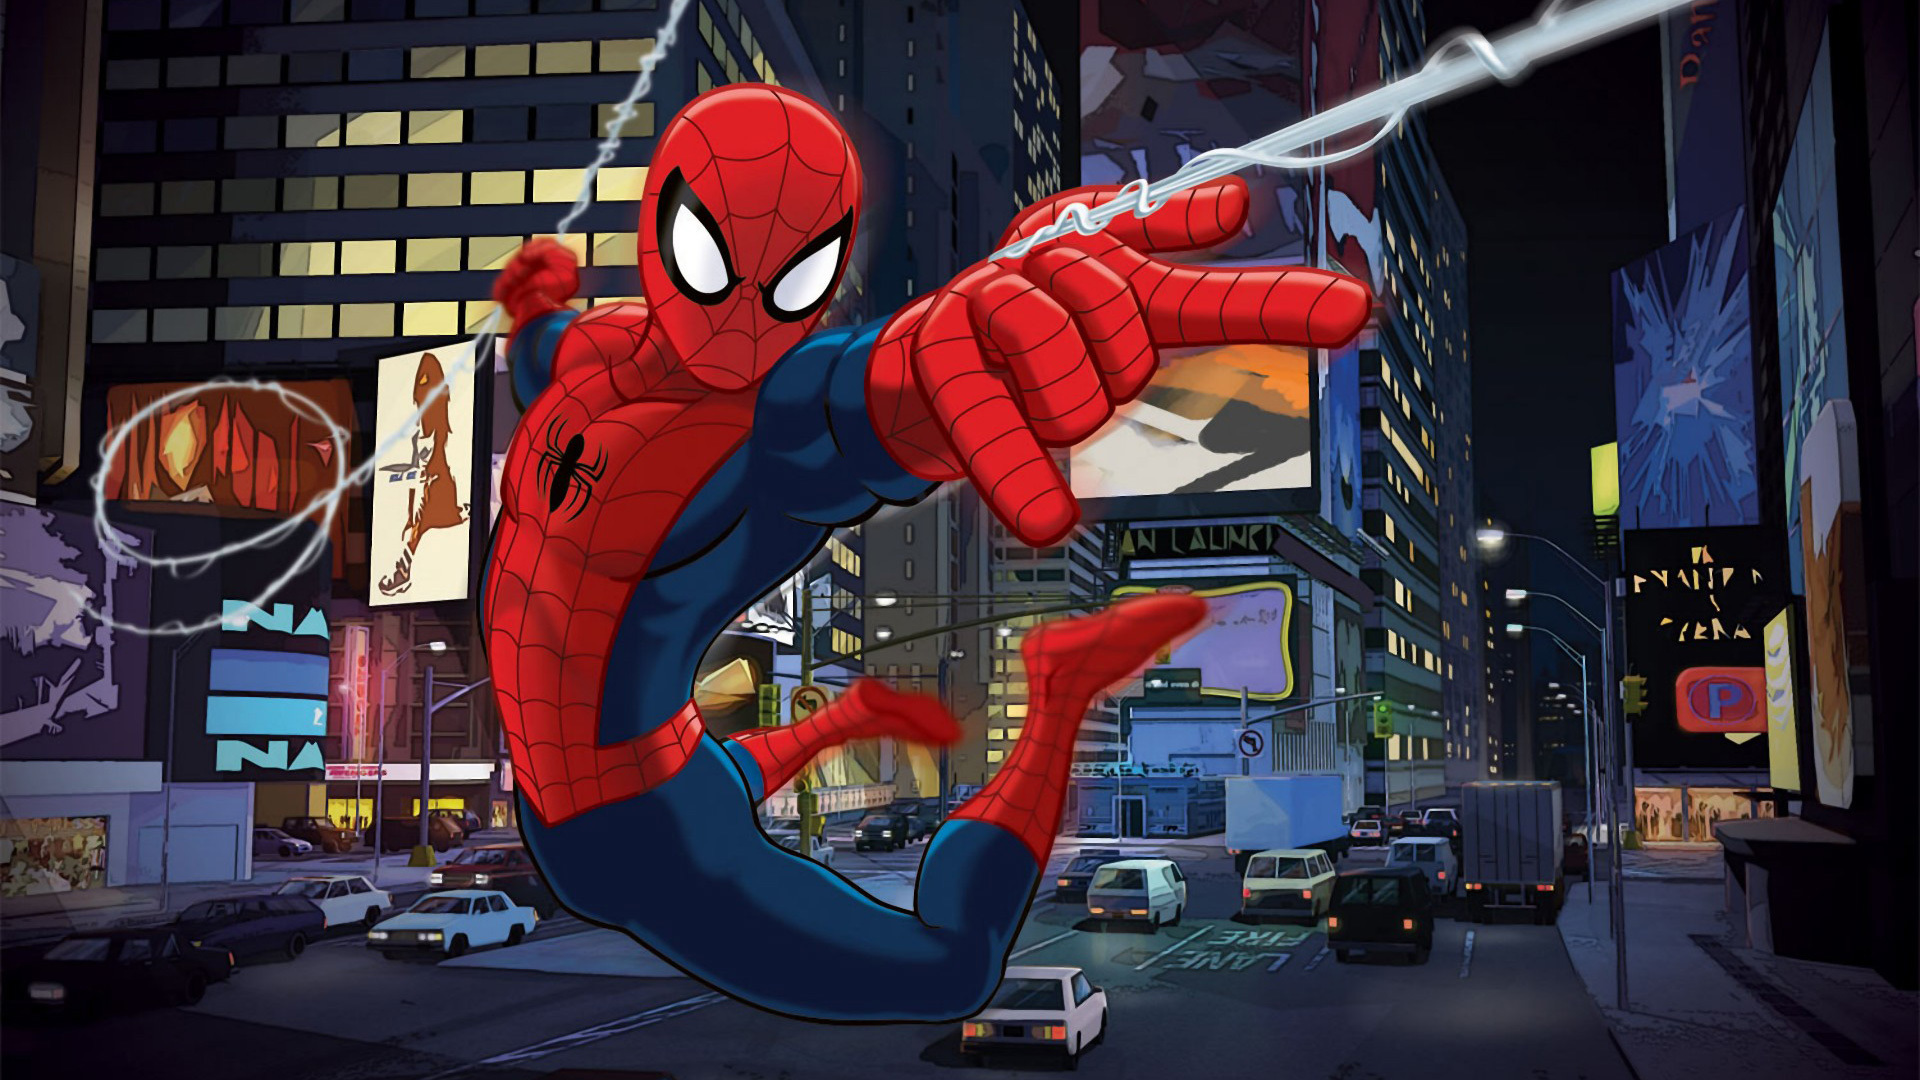 TV Show Ultimate Spider-Man HD Wallpaper | Background Image